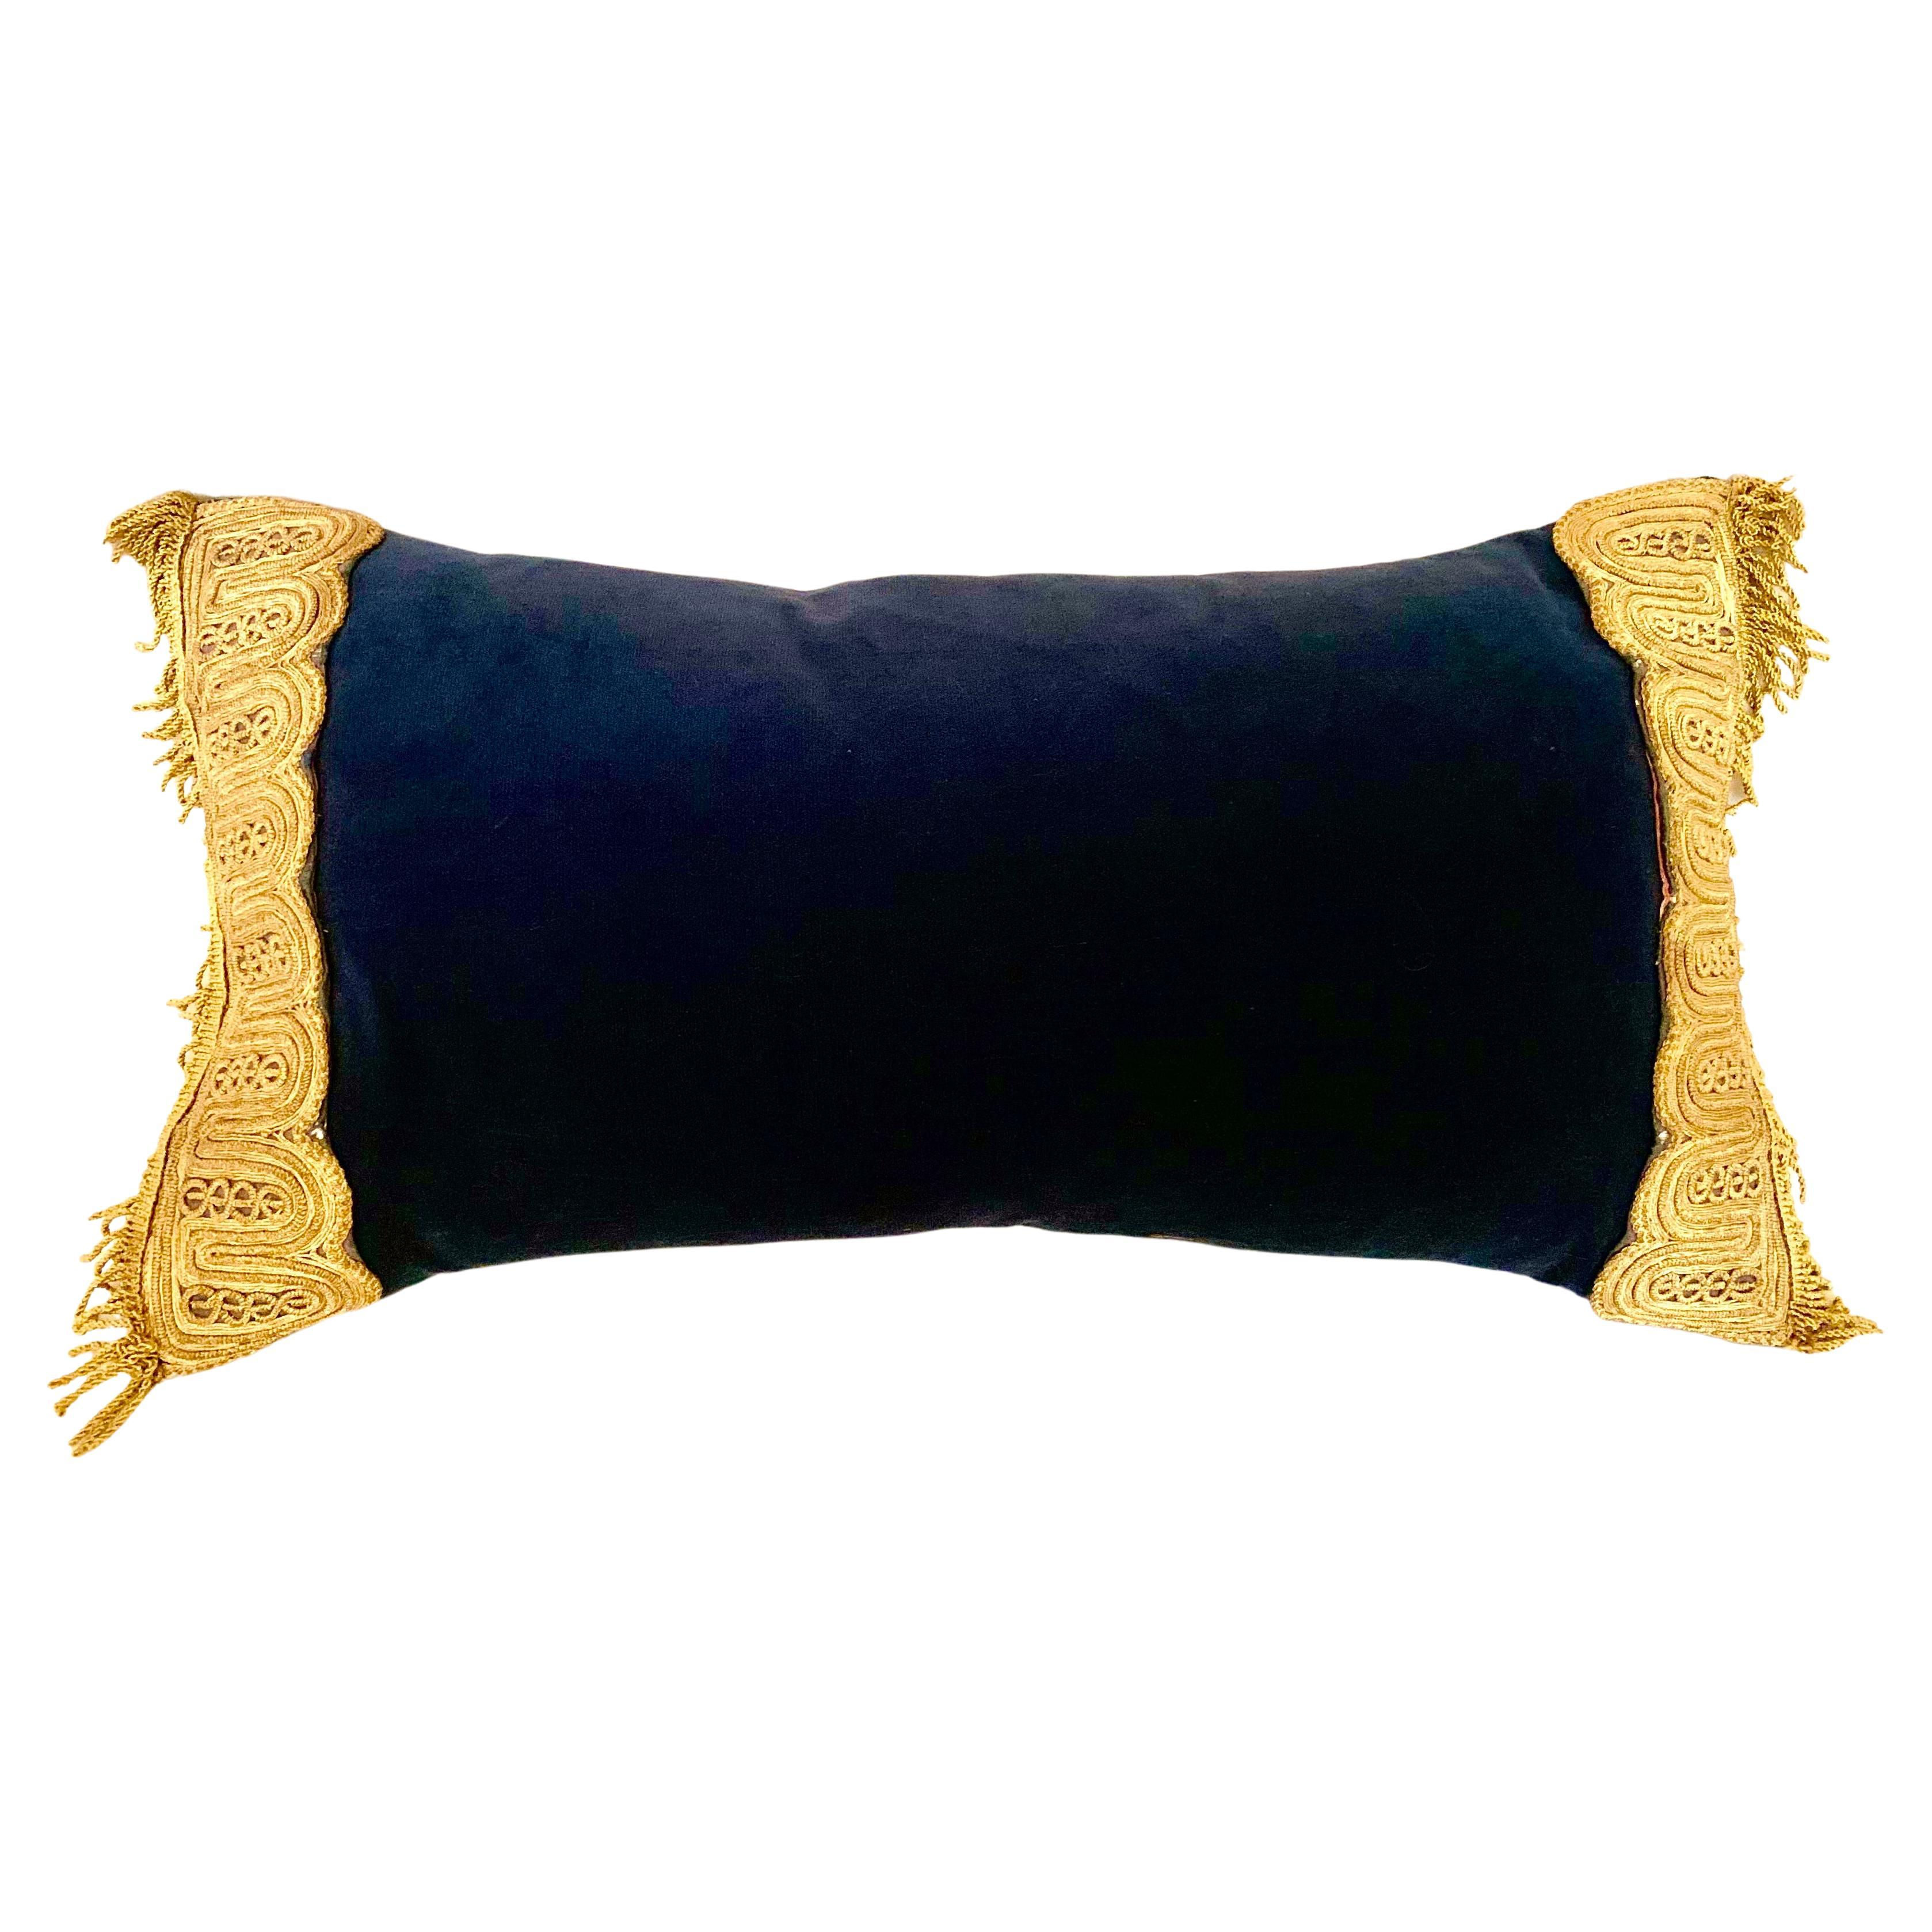 Exquisite Antique Metallic Gold Thread Hand Embroidered Blue Velvet Pillow For Sale